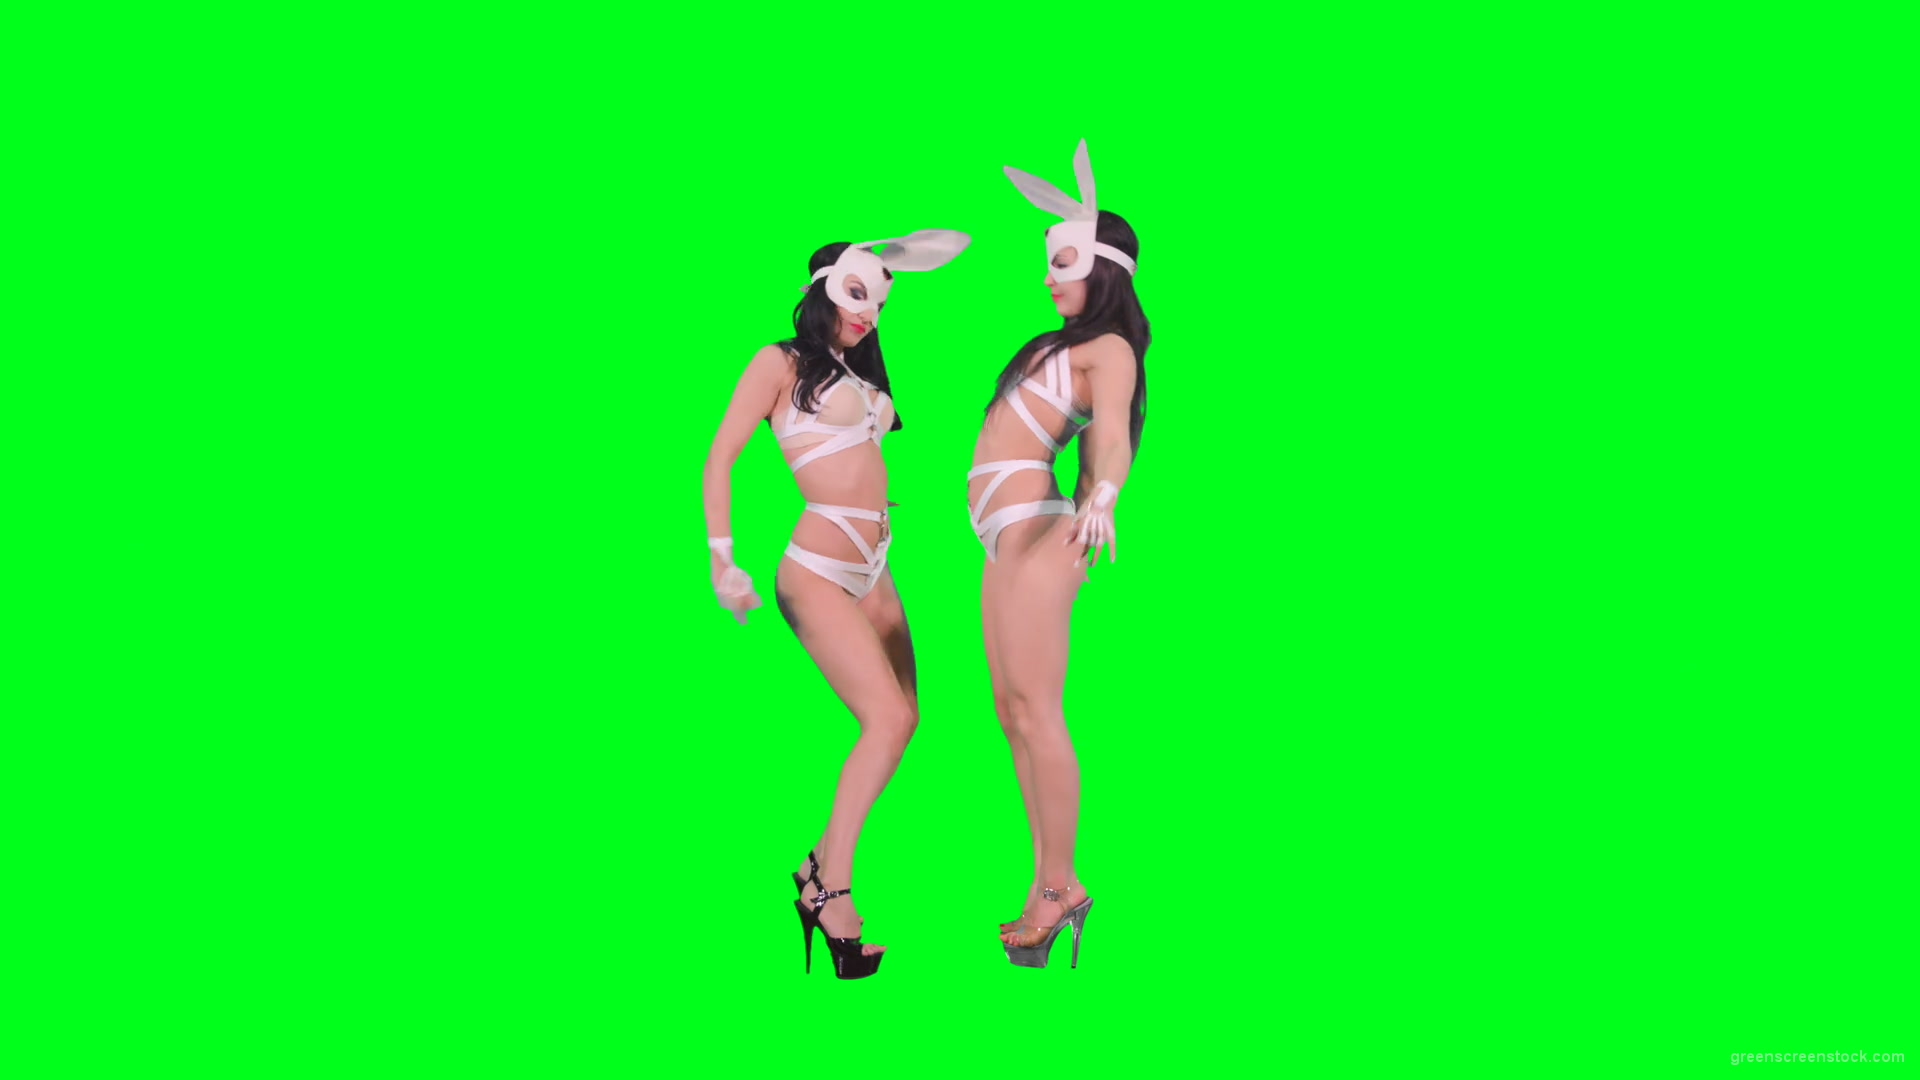 Light-erotic-girls-in-rabbit-playboy-costumes-on-green-screen-moving-sexy-4K-Video-Footage-1920_009 Green Screen Stock